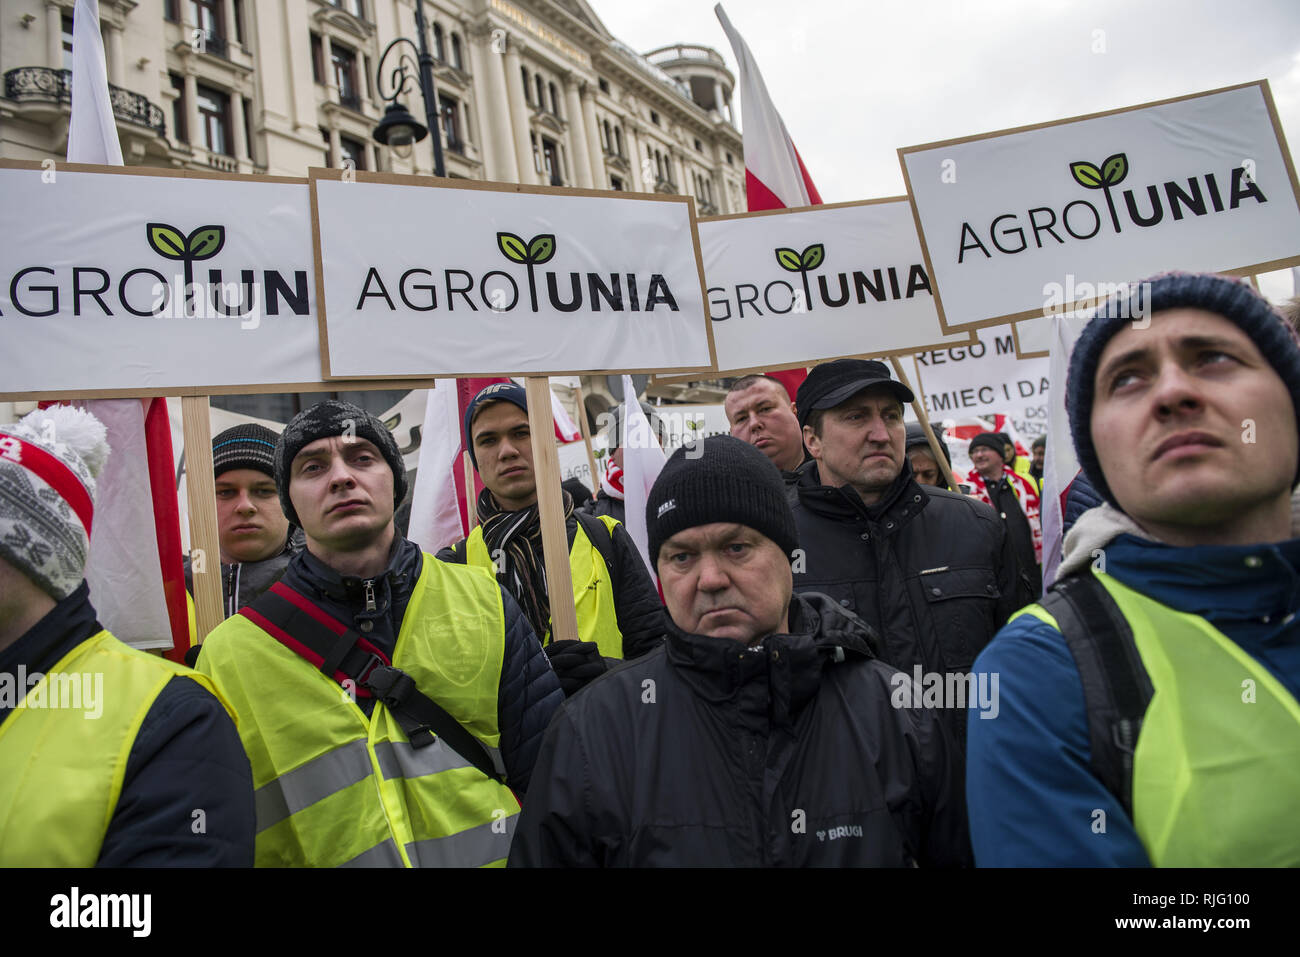 Warsaw, Poland. 6th Feb 2019. Polish farmers are seen holding placards during the protest.Thousands of farmers from across Poland staged a protest outside the presidential palace in Warsaw, demanding repayment of various compensations, control and restrictions over the imports of agricultural products as well as an increase of purchase prices, The demonstration was held by the Agrounia group and had been billed by farmers as the ''Siege of Warsaw.'' Credit: ZUMA Press, Inc./Alamy Live News Stock Photo